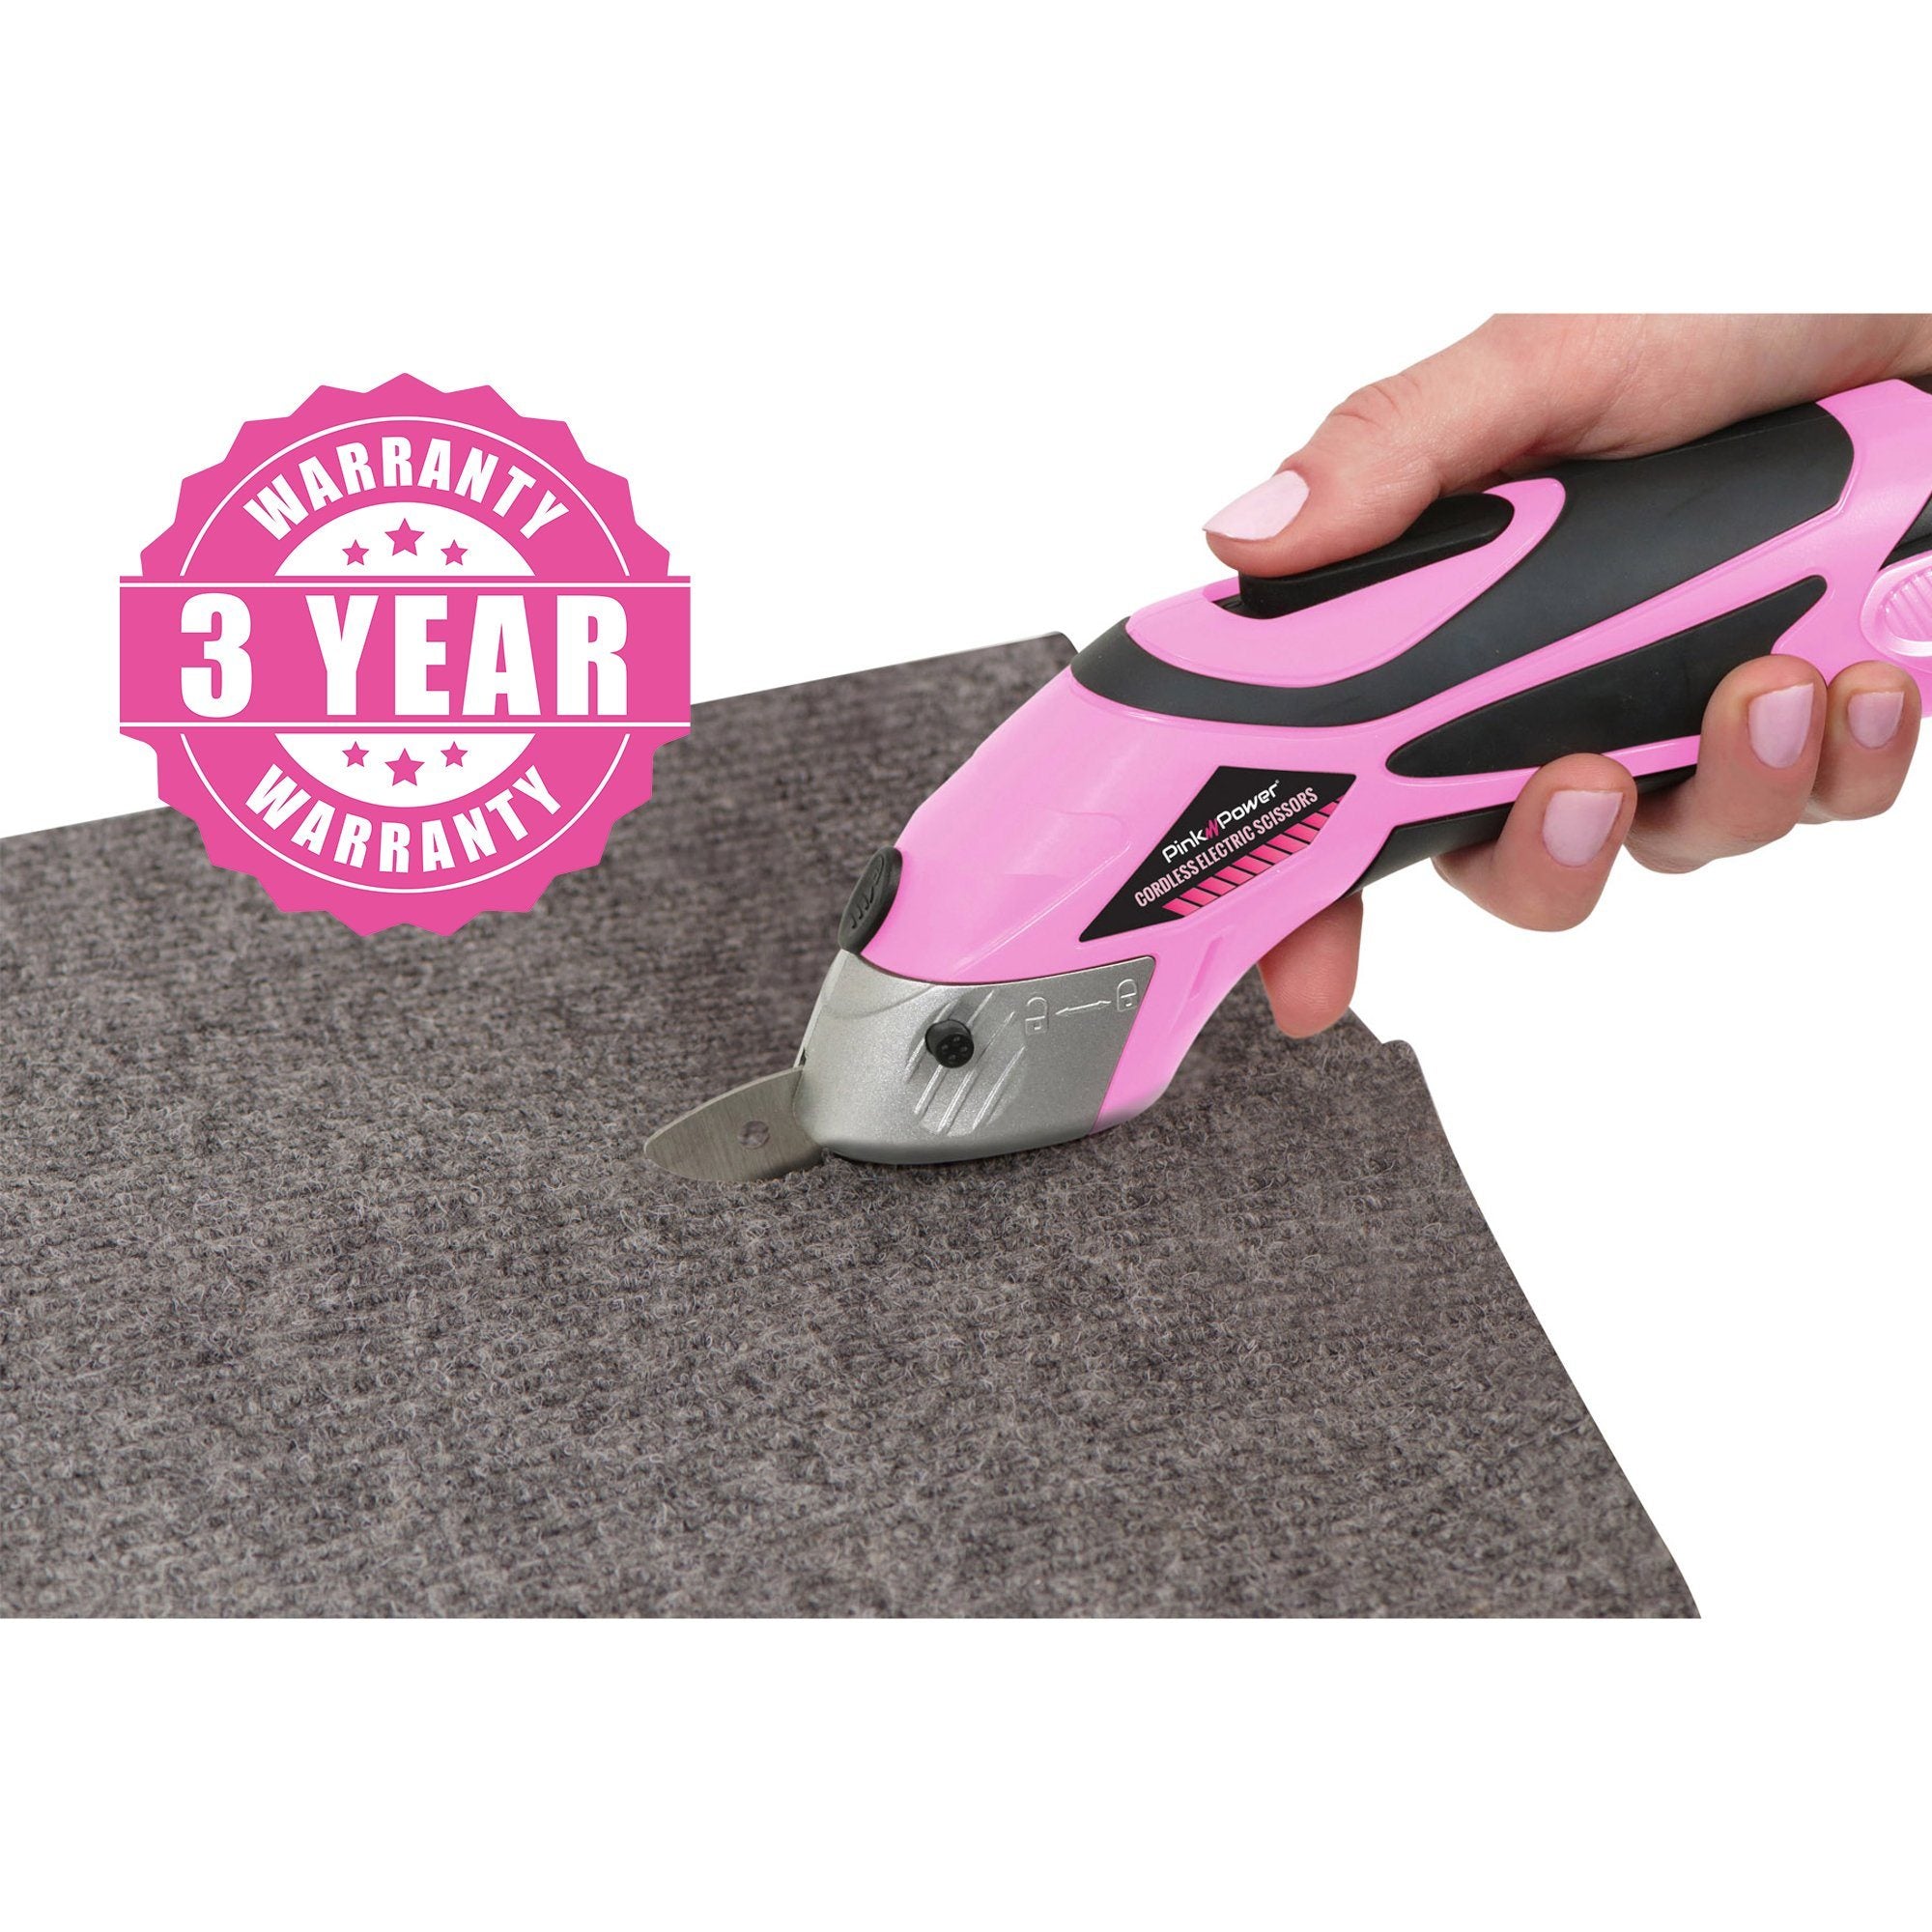 HG2043 Electric Scissors And Blade Bundle | Pink Power